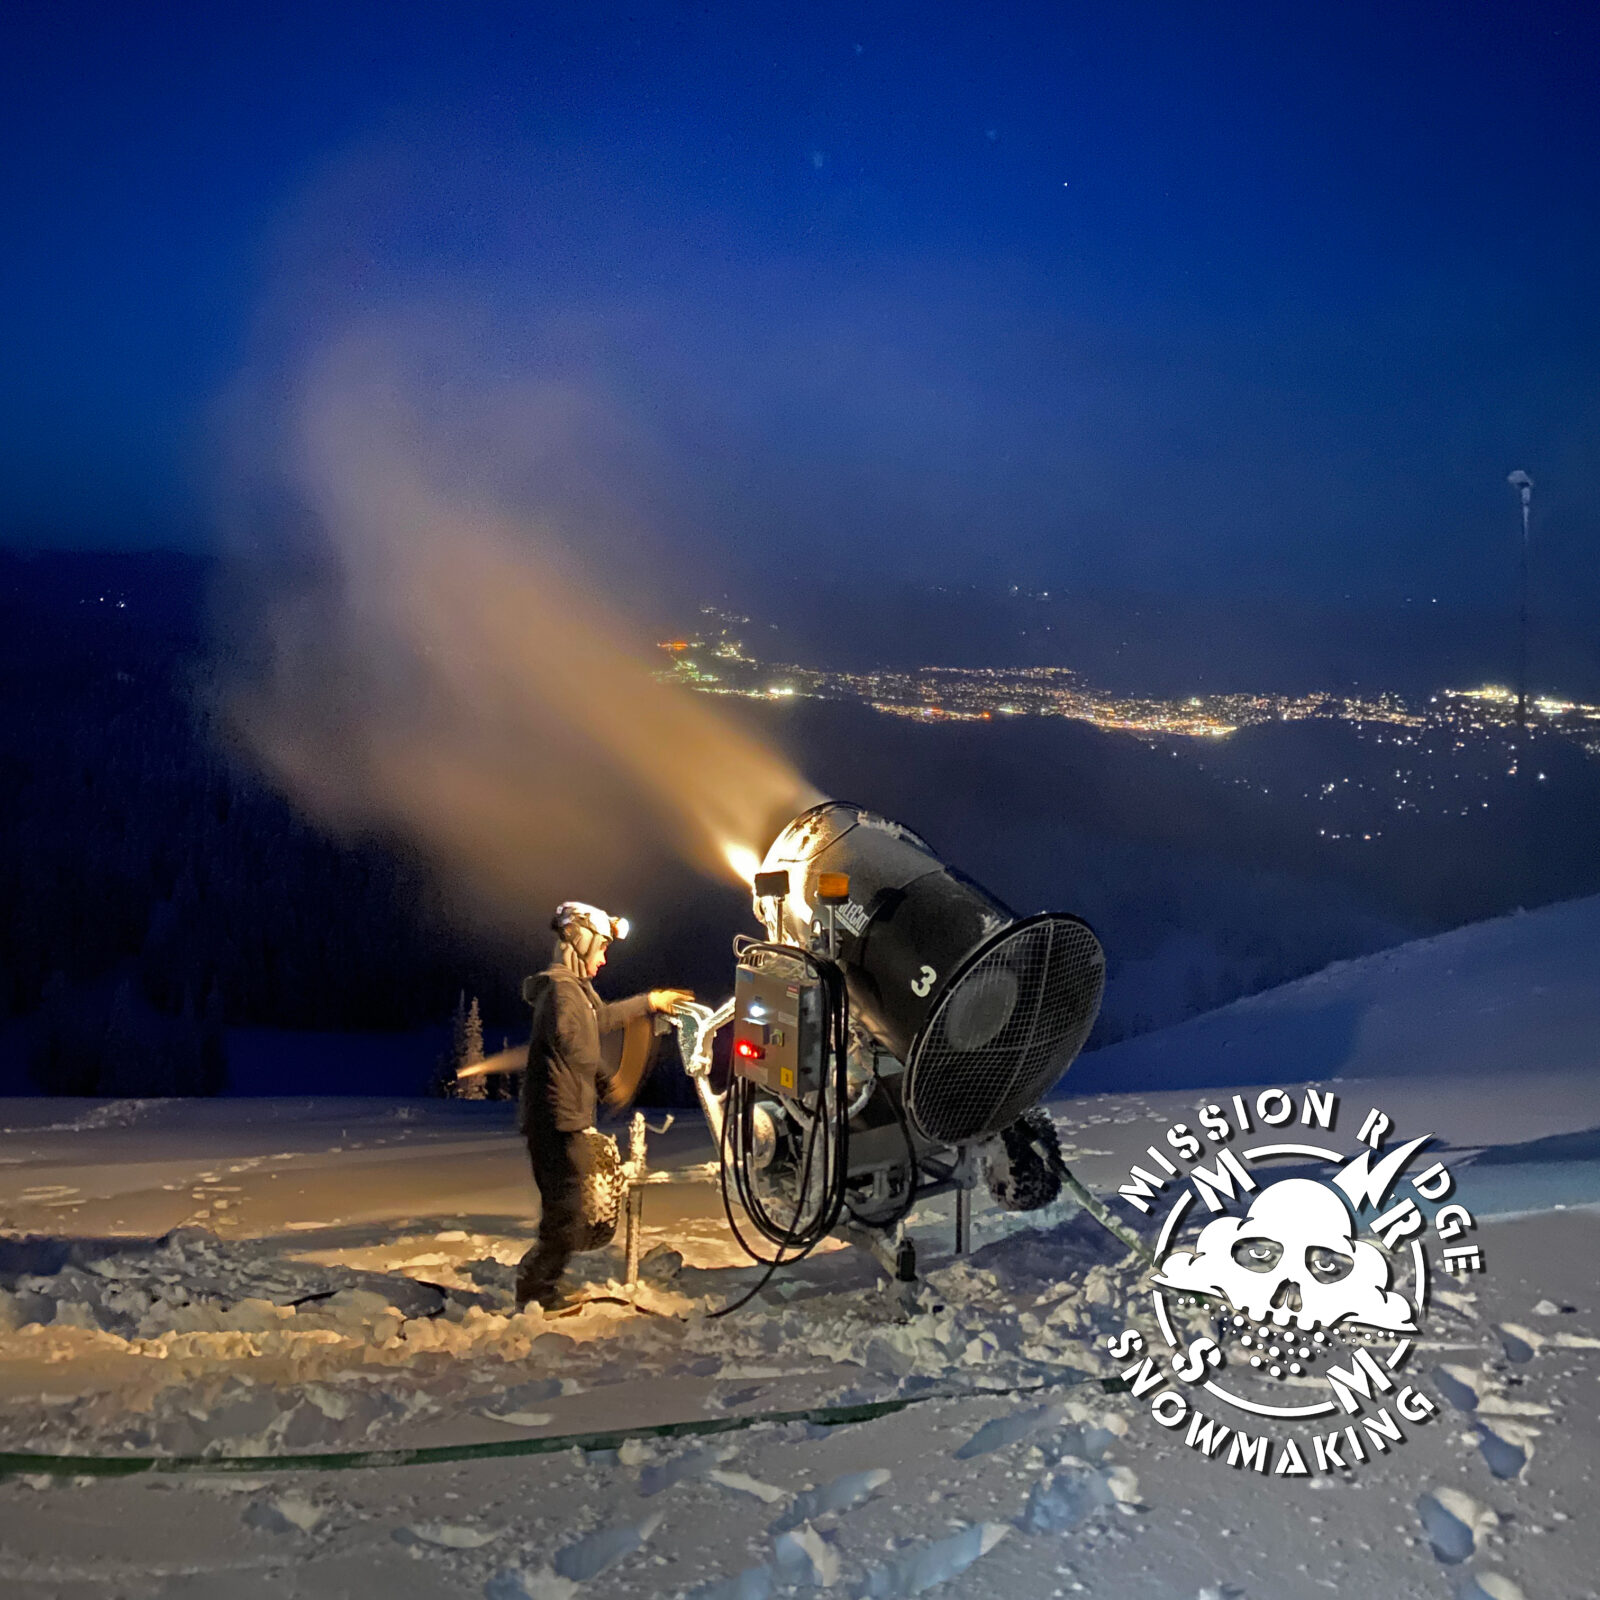 Snowmaker working with a snow gun at night with city lights below